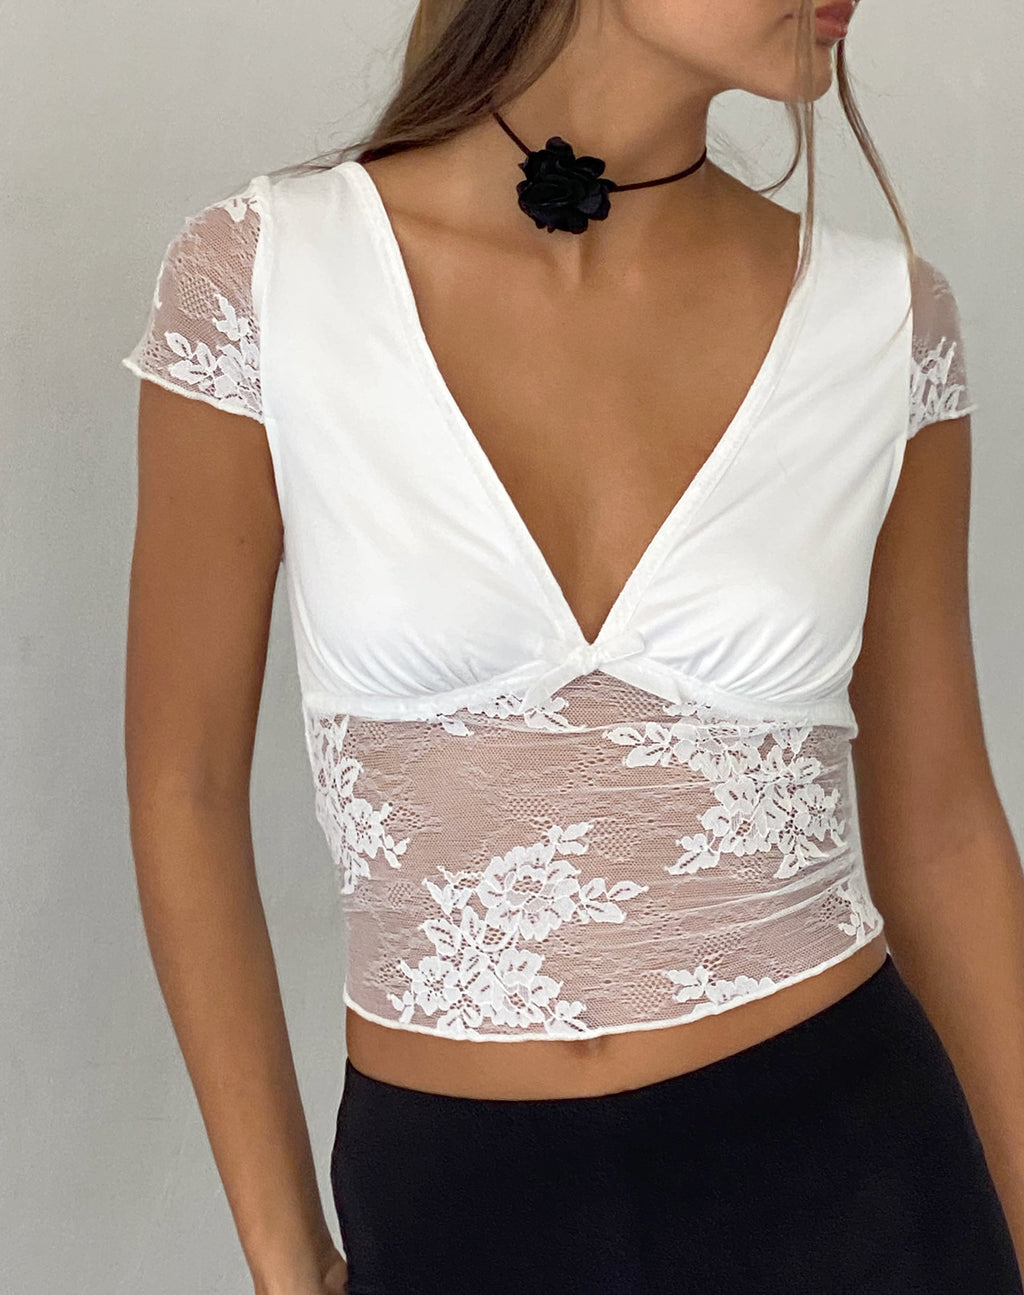 Prili Plunge Top in Lace Ivory